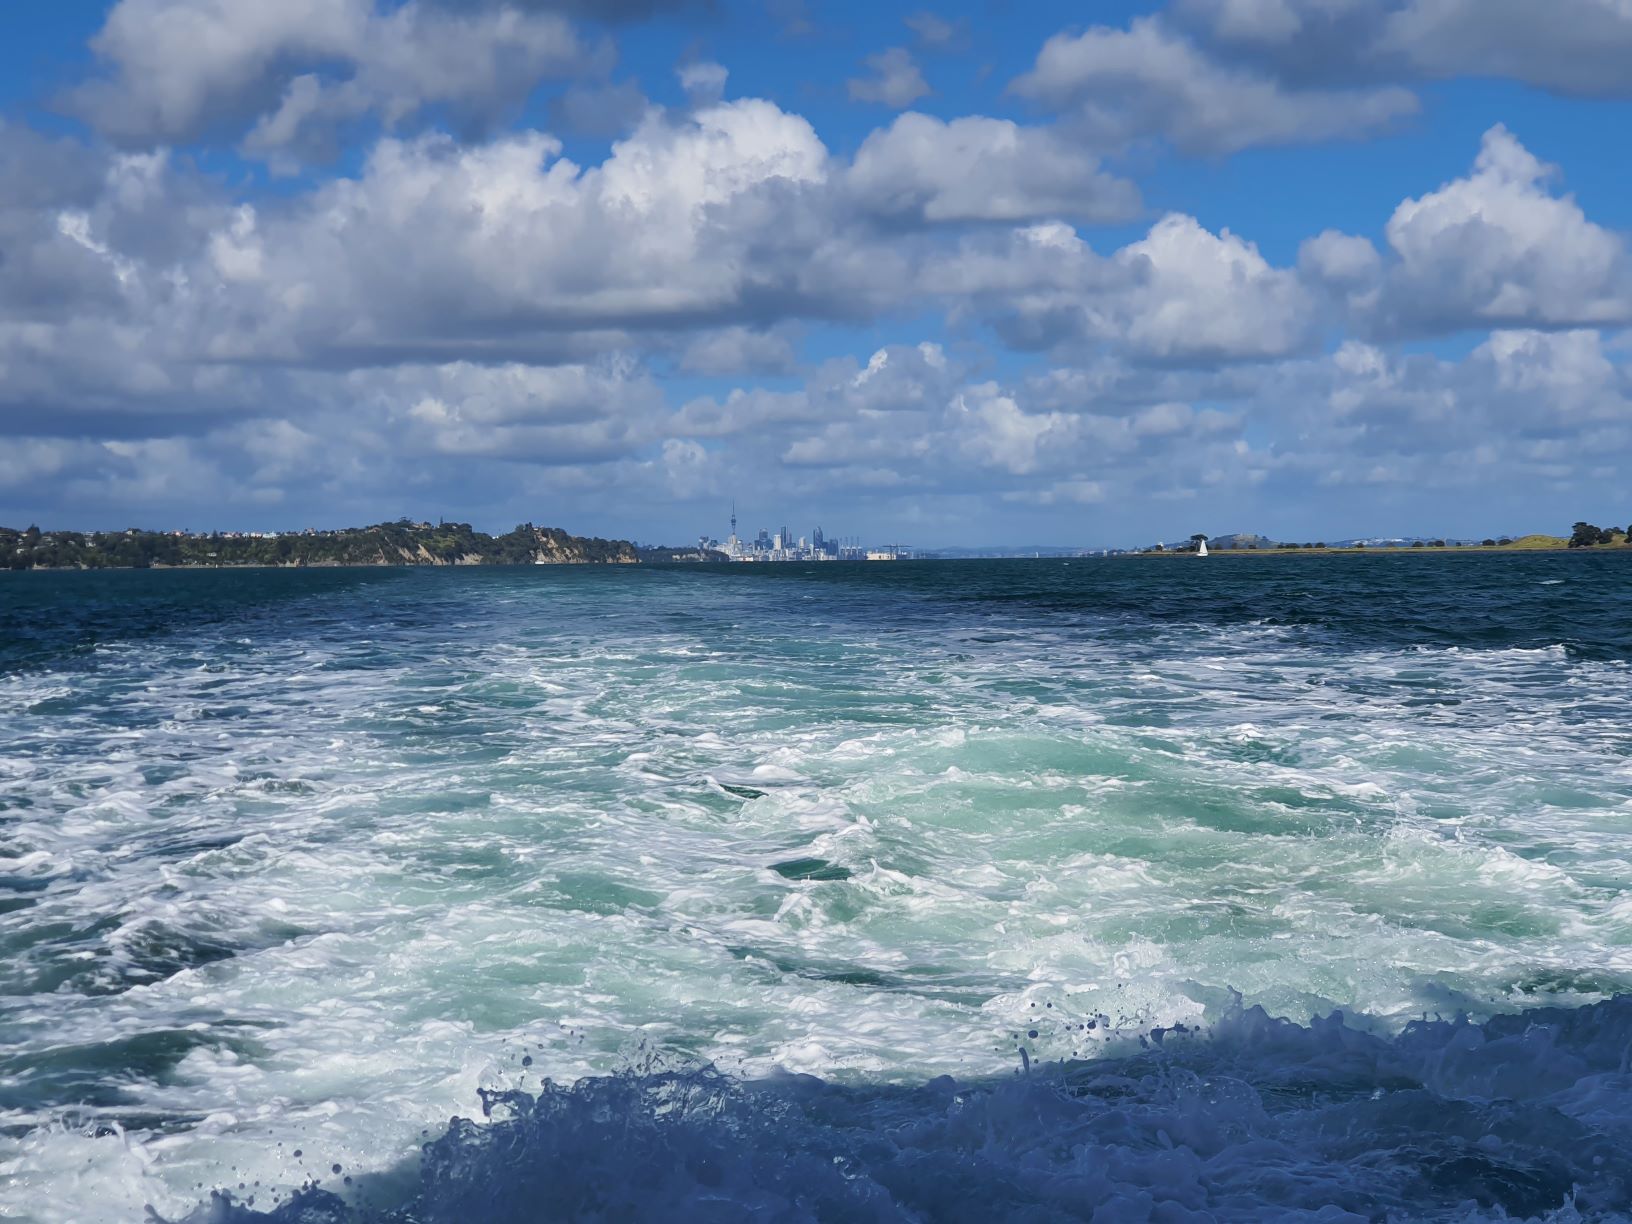 Auckland as seen from the Waiheke Island ferry